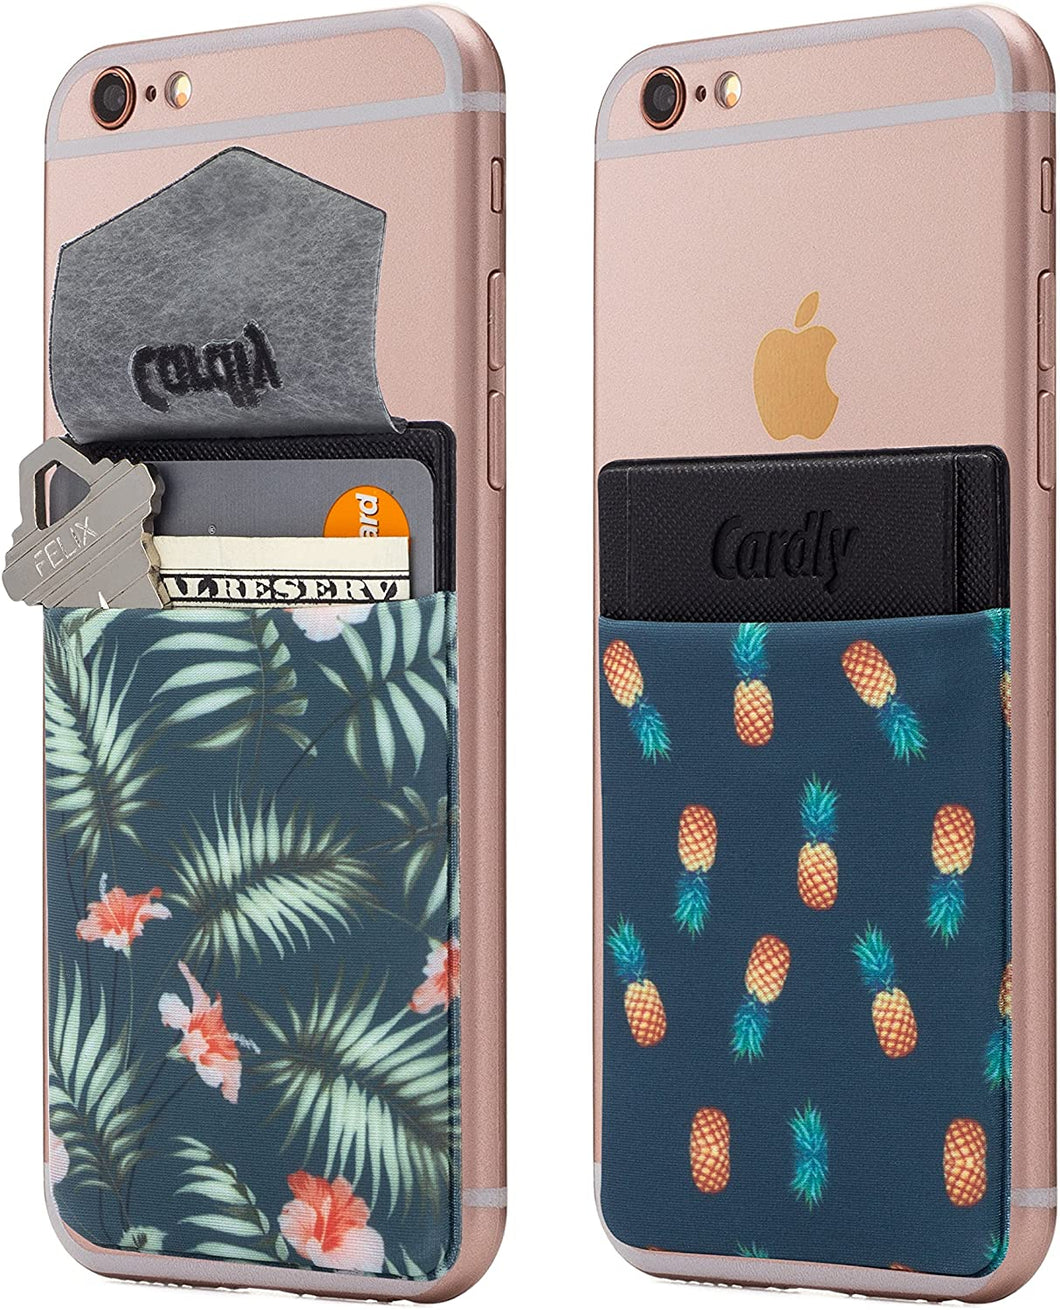 (Two) Secure Cell Phone Stick On Wallet Card Holder Phone Pocket for iPhone, Android and All Smartphones. (Tropical)